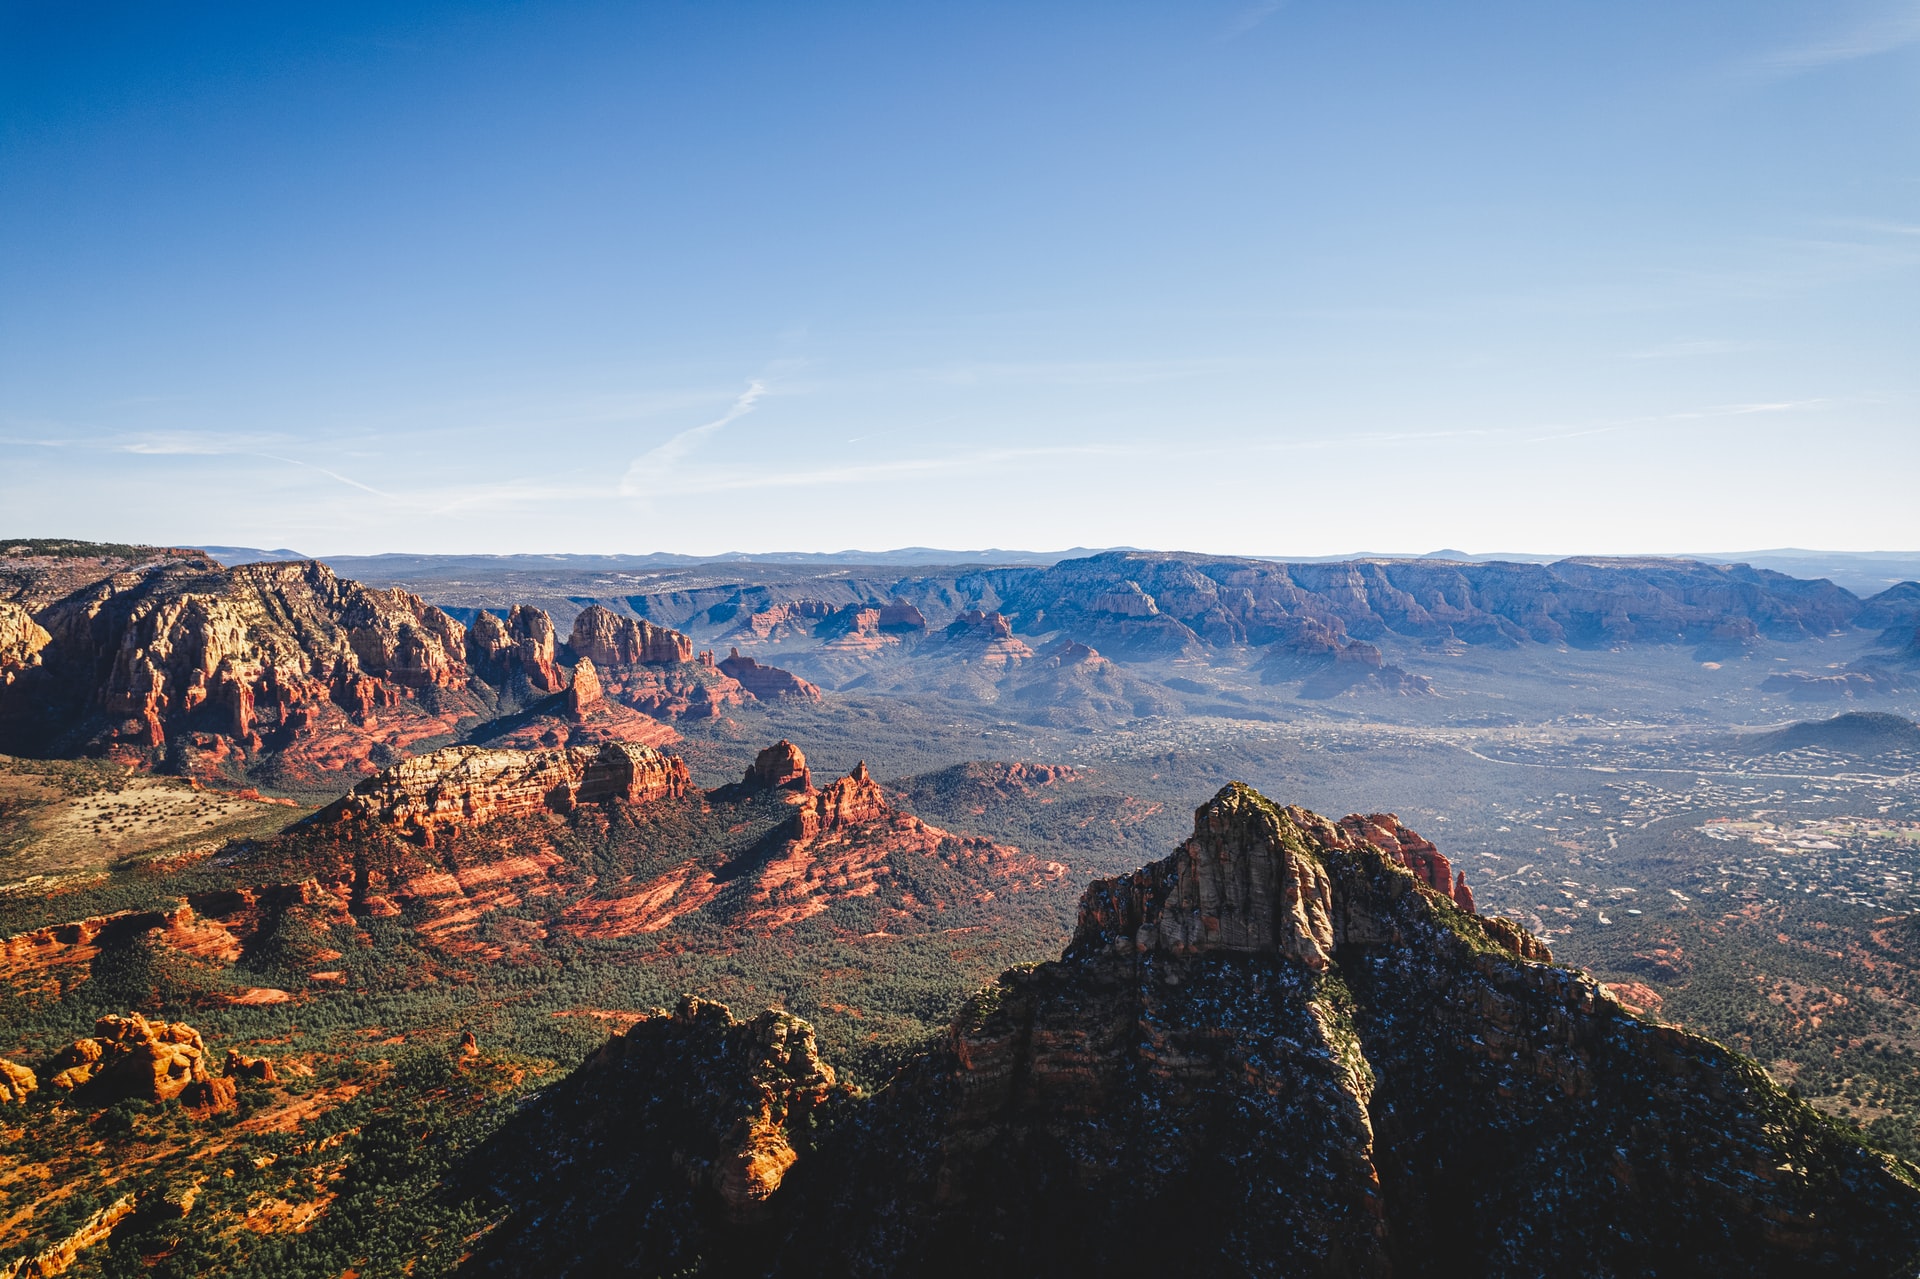 Private Vacation Rentals in Sedona